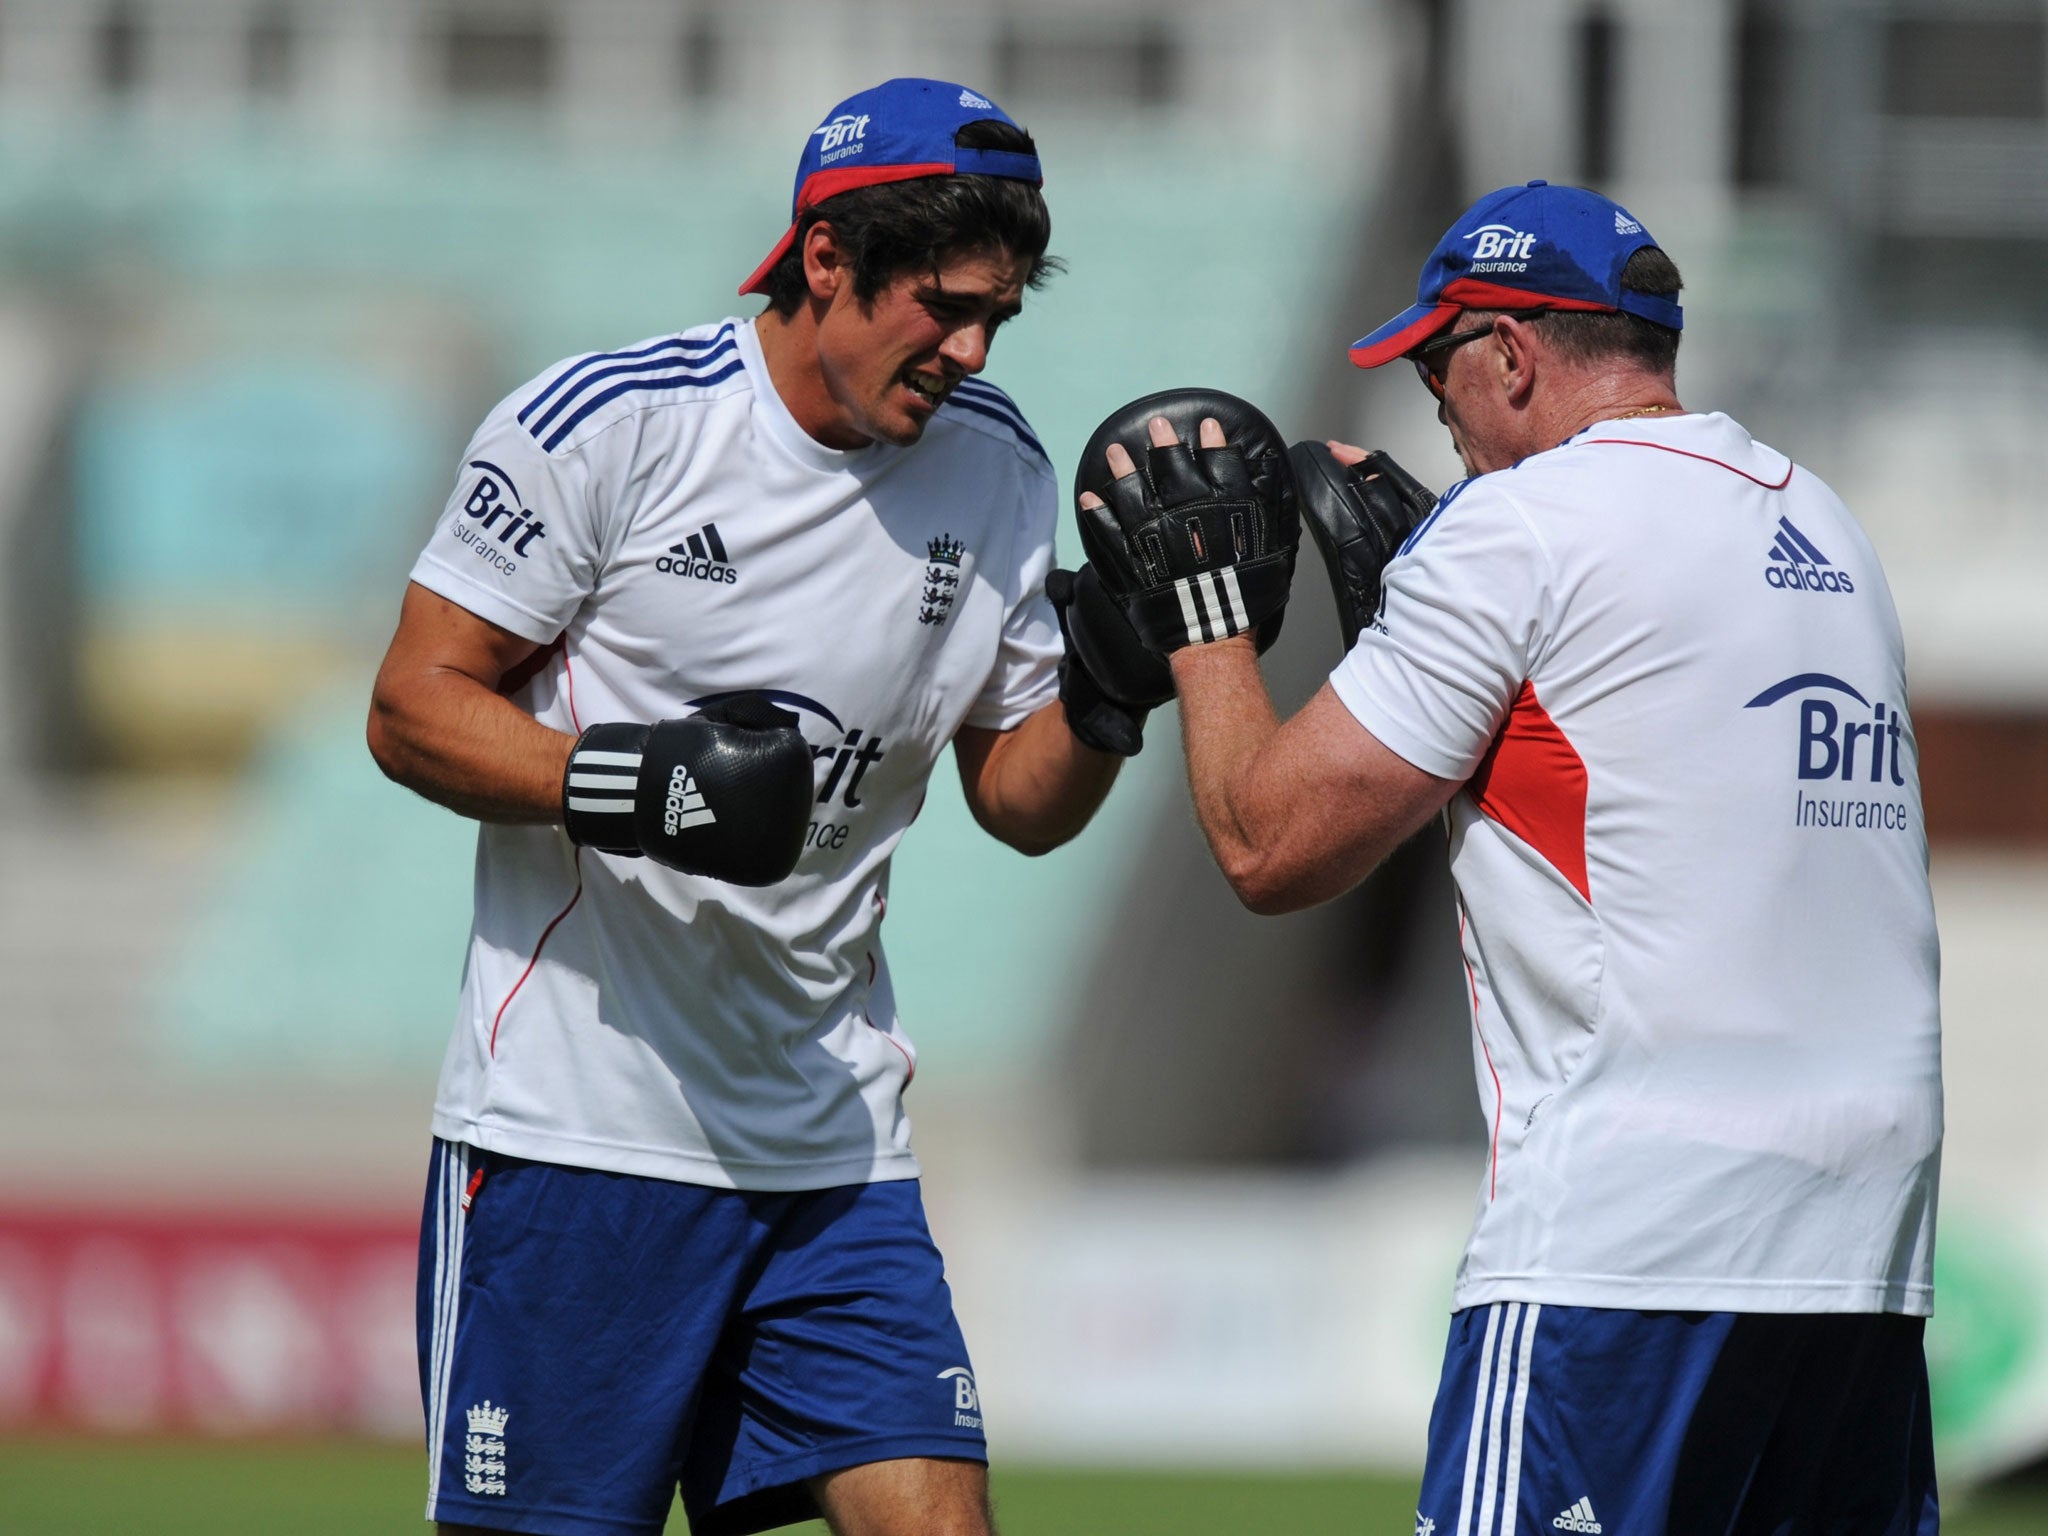 England's captain, Alastair Cook, gets his boxing gloves on at The Oval yesterday ahead of tomorrow's fifth and final Test